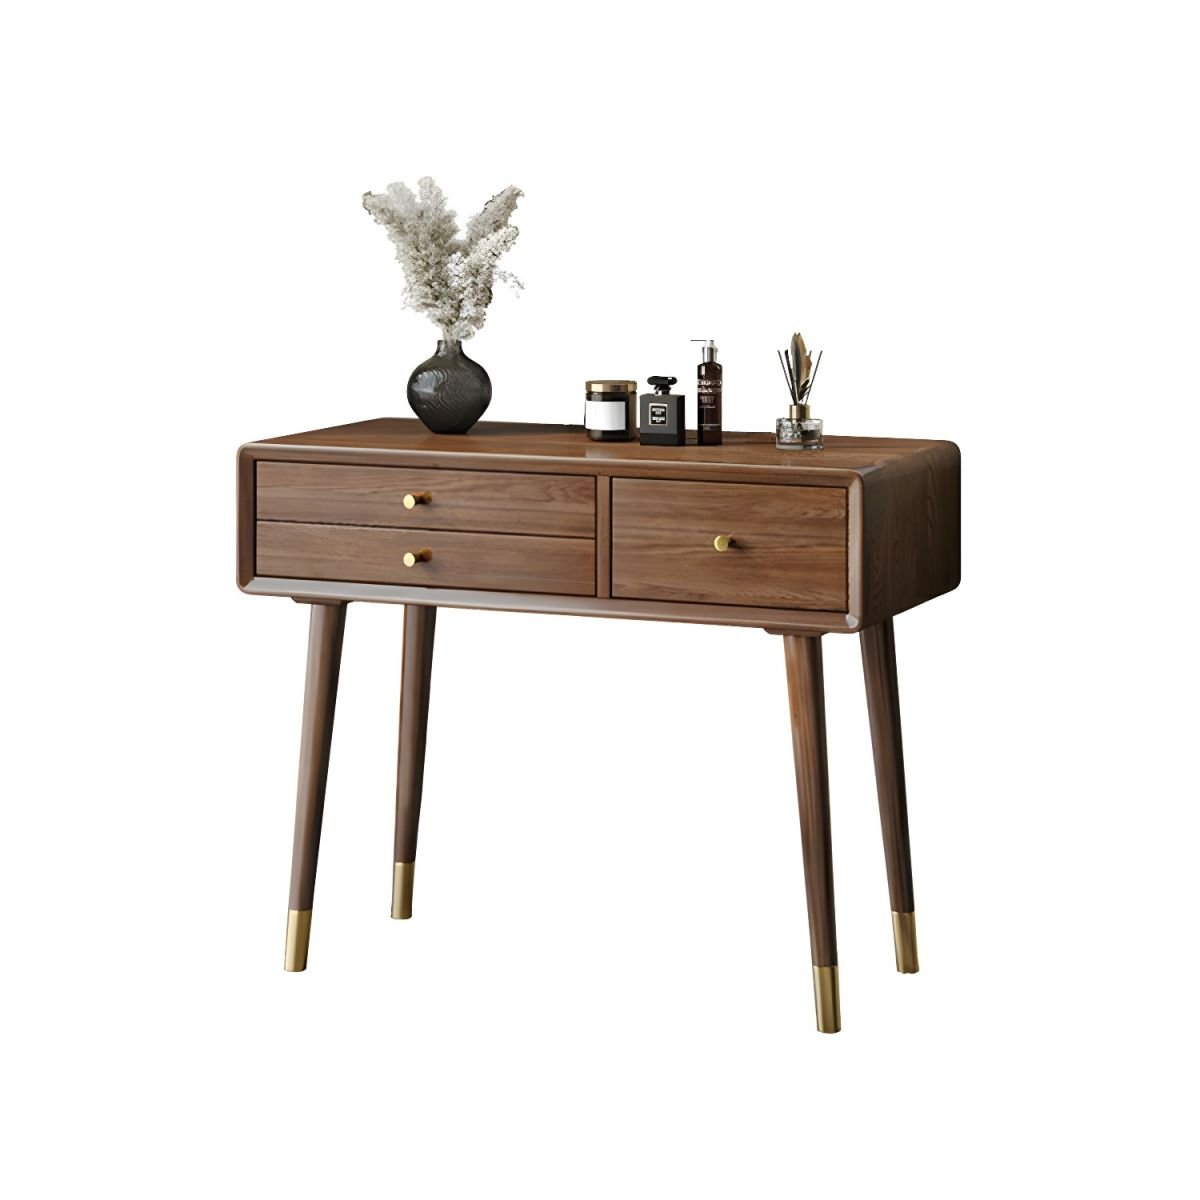 Natural Wood Standard Contemporary Makeup Vanity Sepia with 4 Drawers